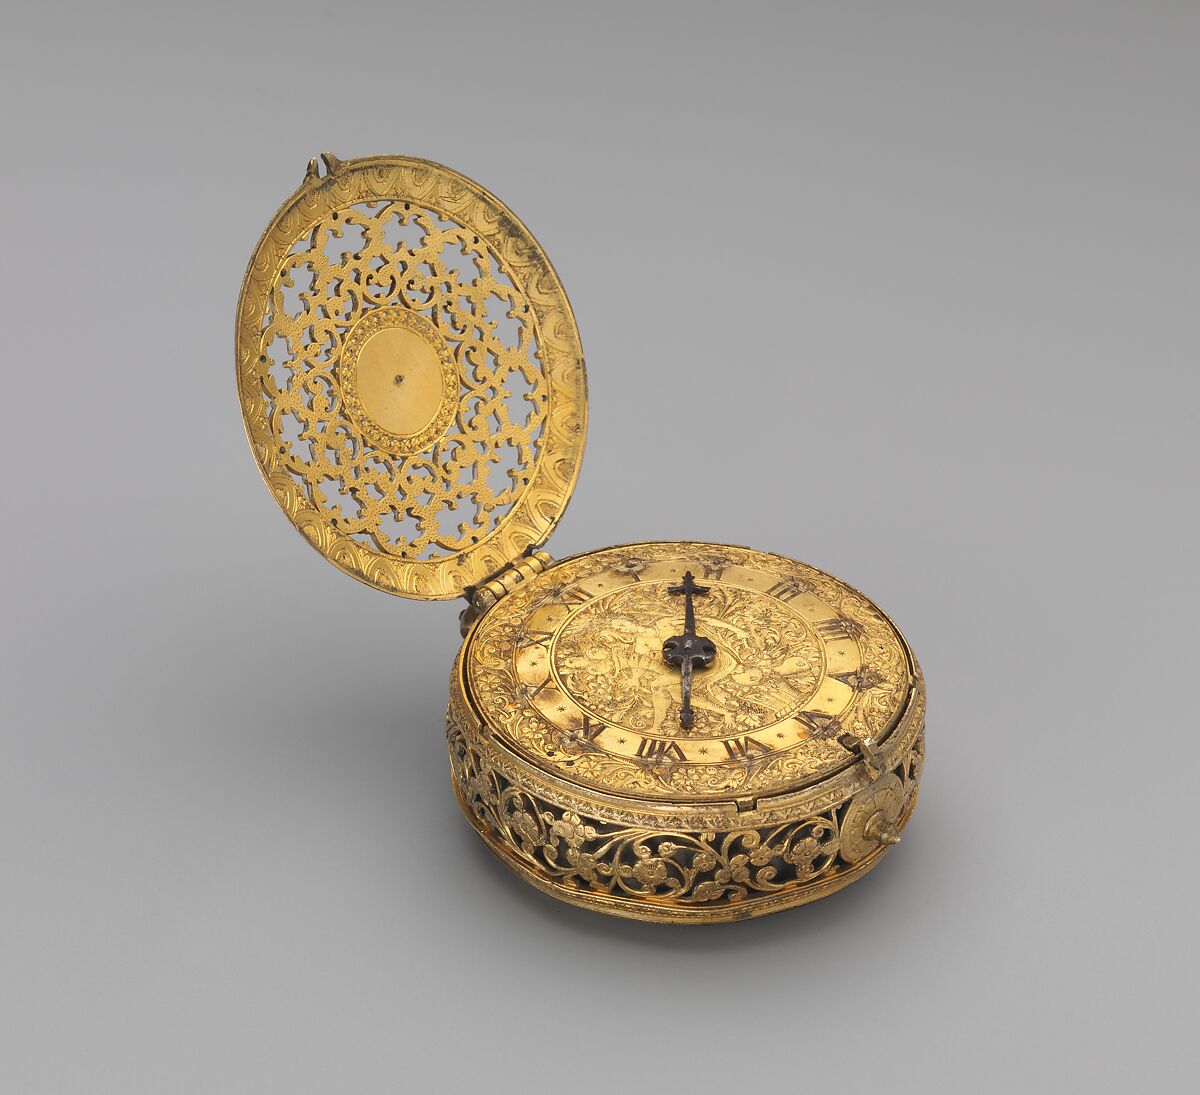 Clock watch, Movement by Michael Nouwen, or Nouen (Flemish, active London, ca. 1600–10, died 1613), Case: gilded brass; Dial: gilded brass with a blued steel hand; Movement: gilded brass and iron, British, London 